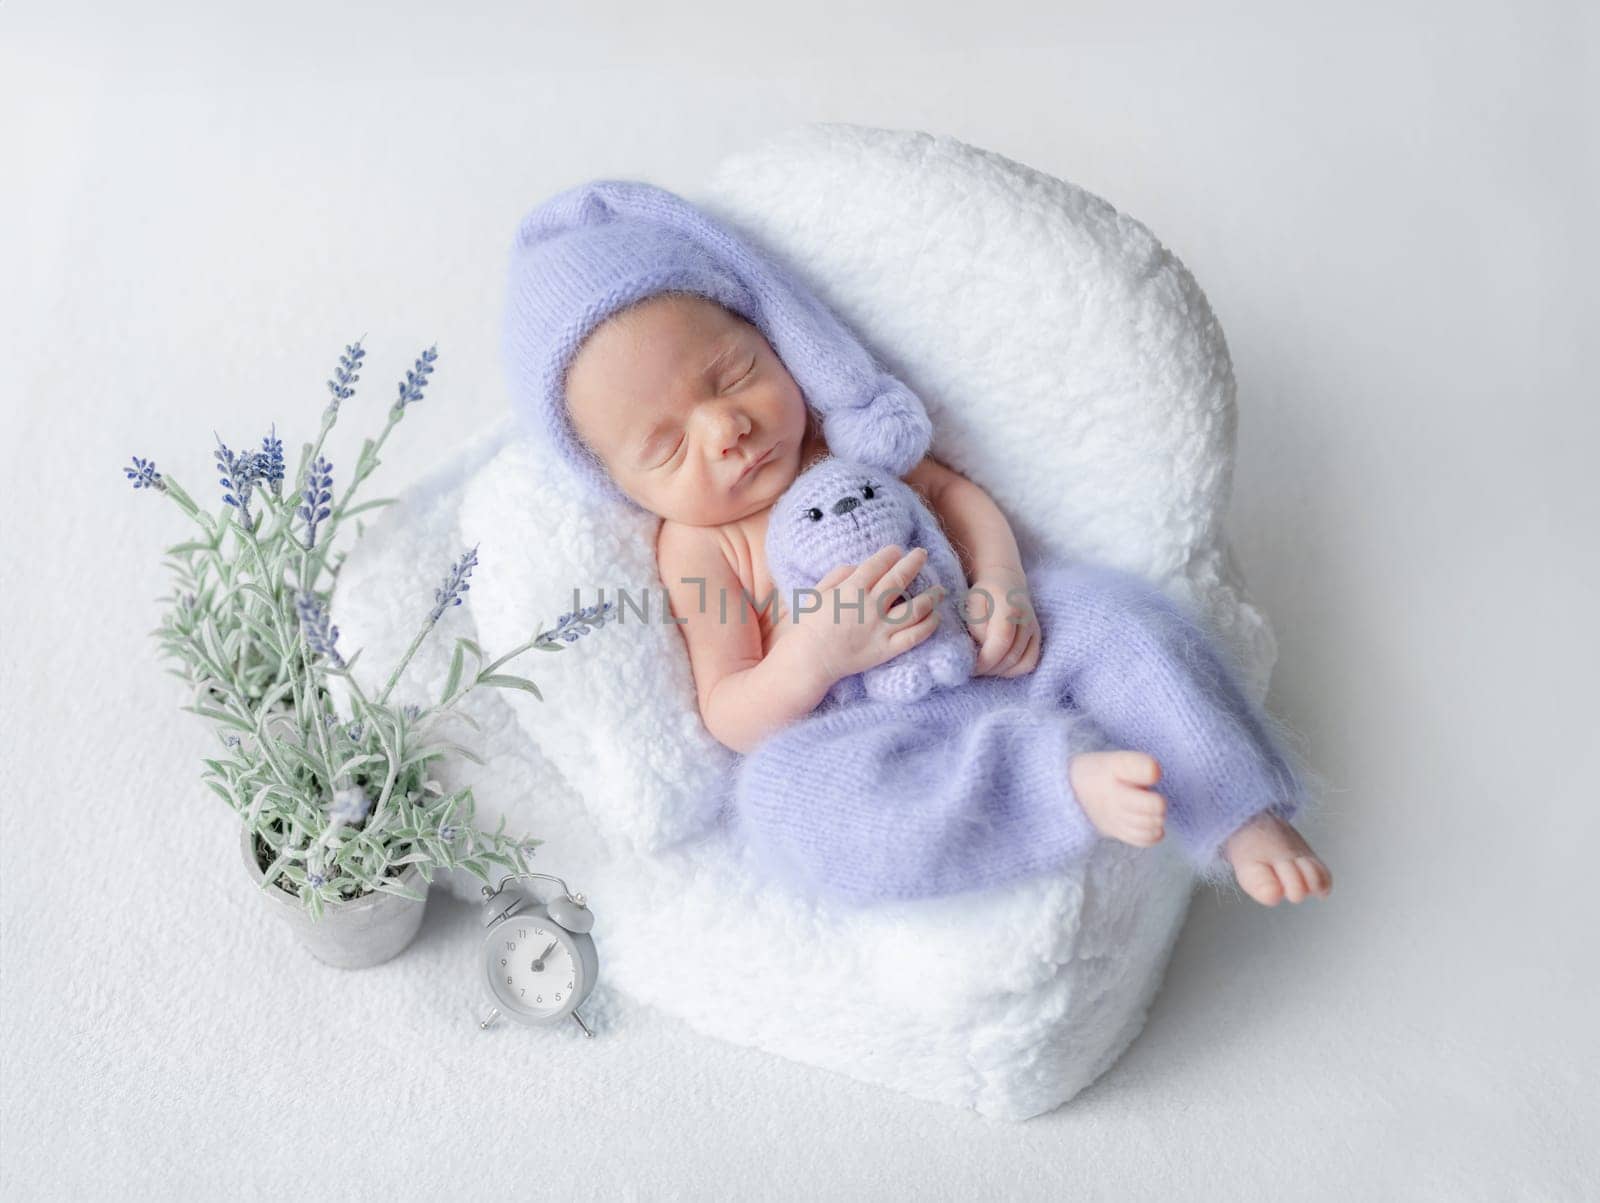 Newborn Baby In Lilac Pants And Hat Sleeps In Tiny Chair by tan4ikk1